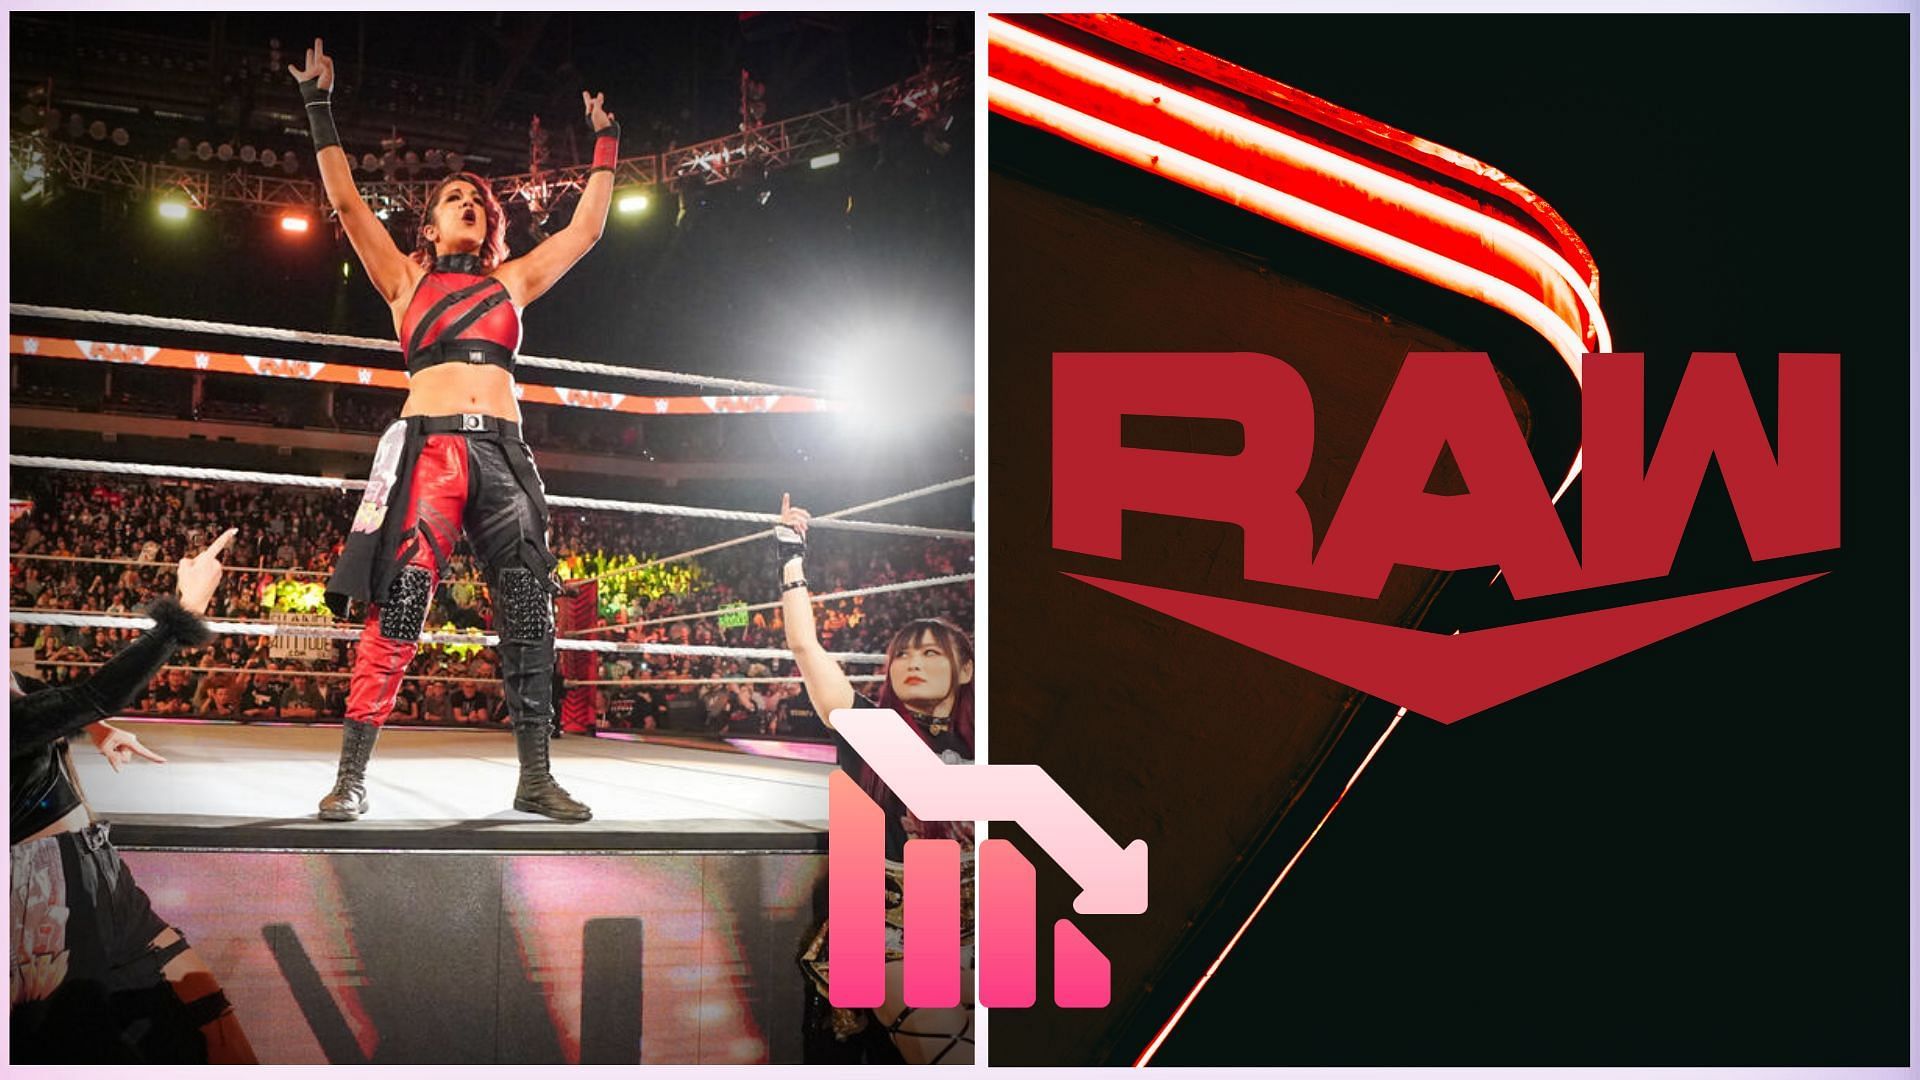 WWE RAW is the longest running weekly TV show.